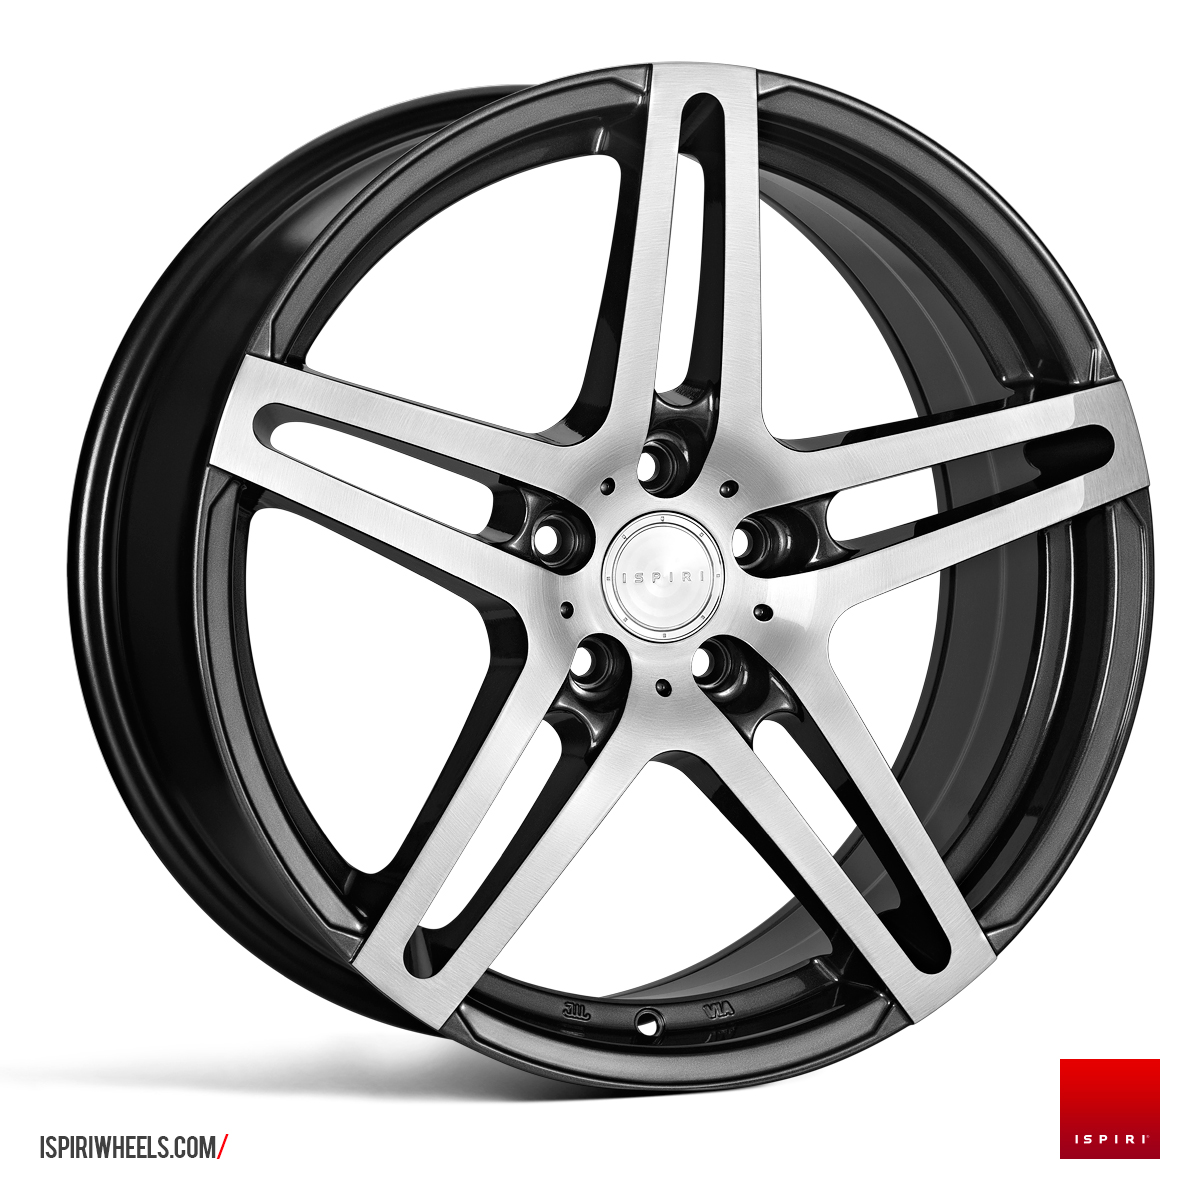 NEW 19" ISPIRI ISR12 ALLOY WHEELS IN GRAPHITE/BRUSHED POLISH, DEEPER 9.5" ALL ROUND